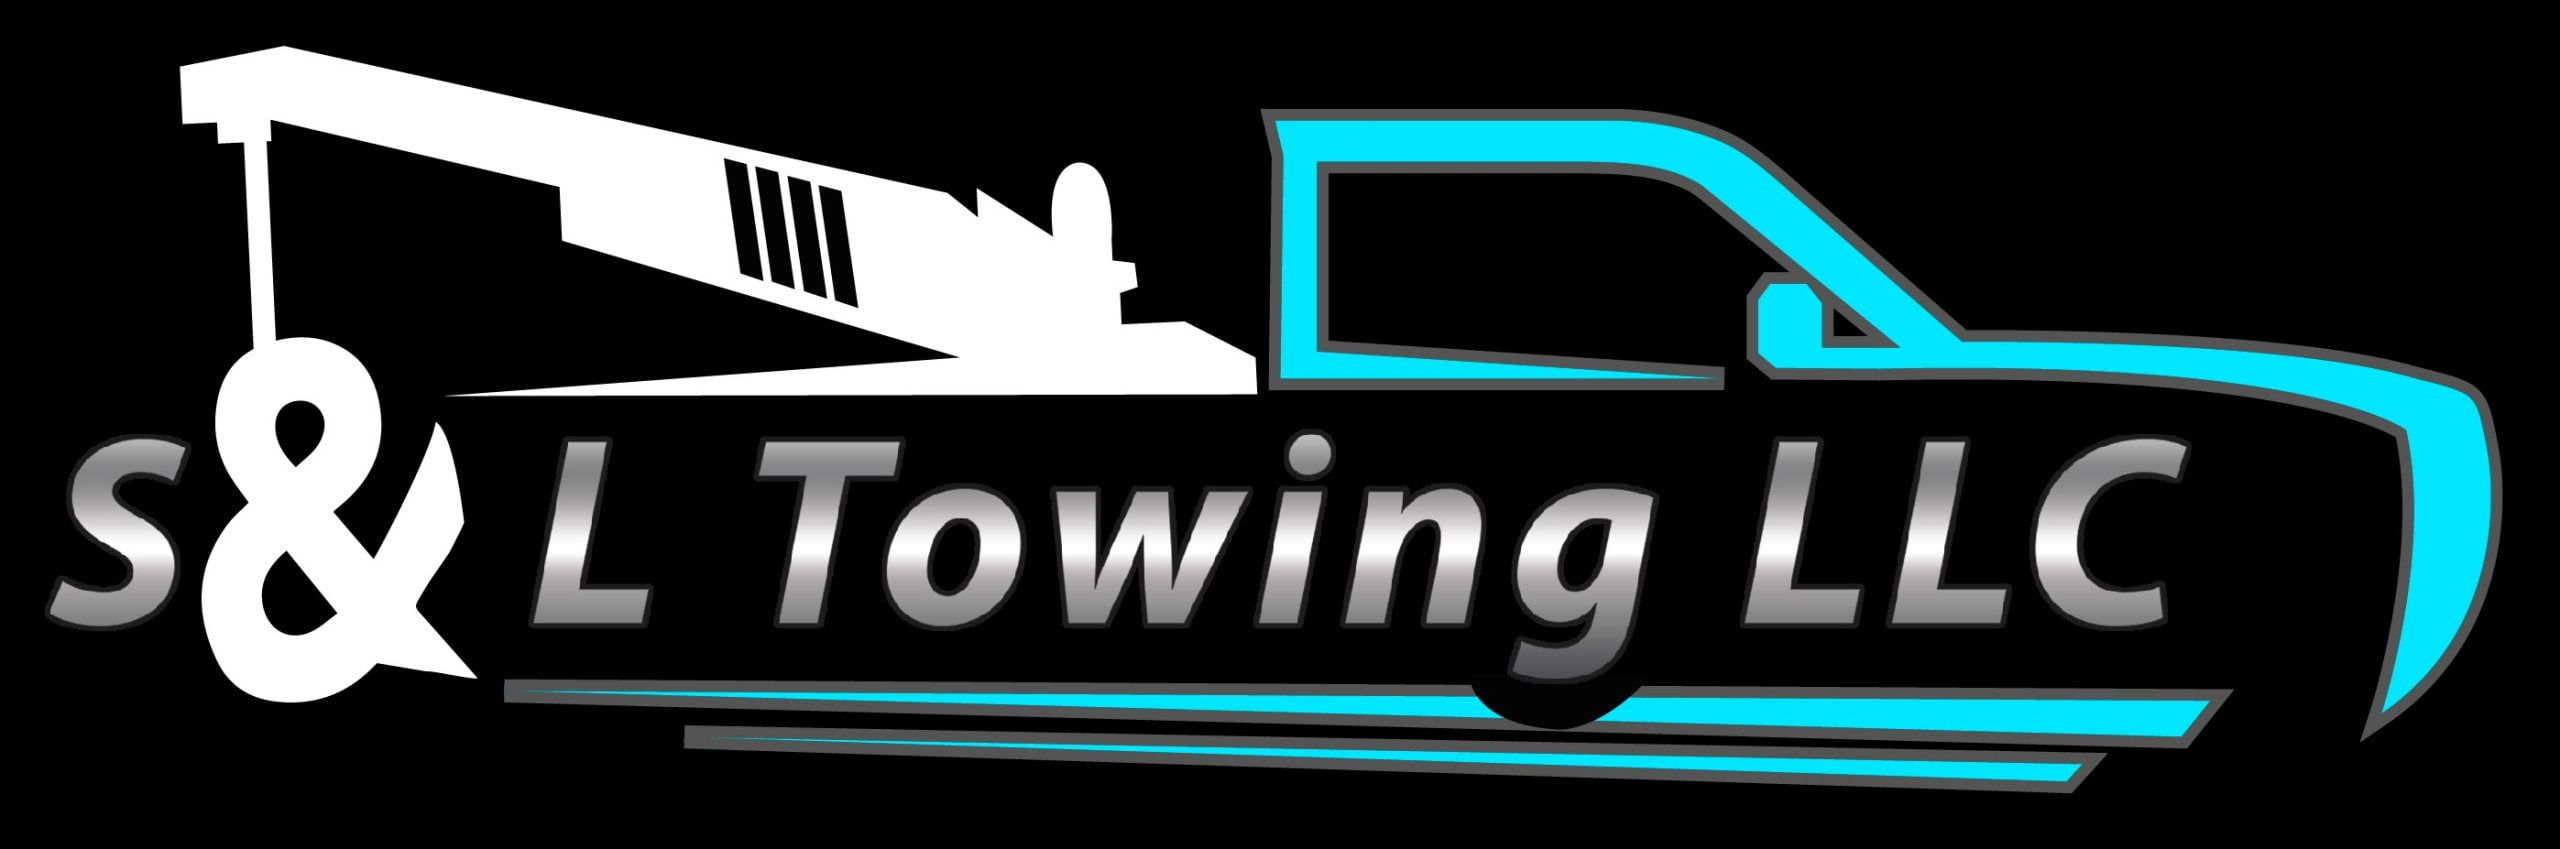 S & L Towing